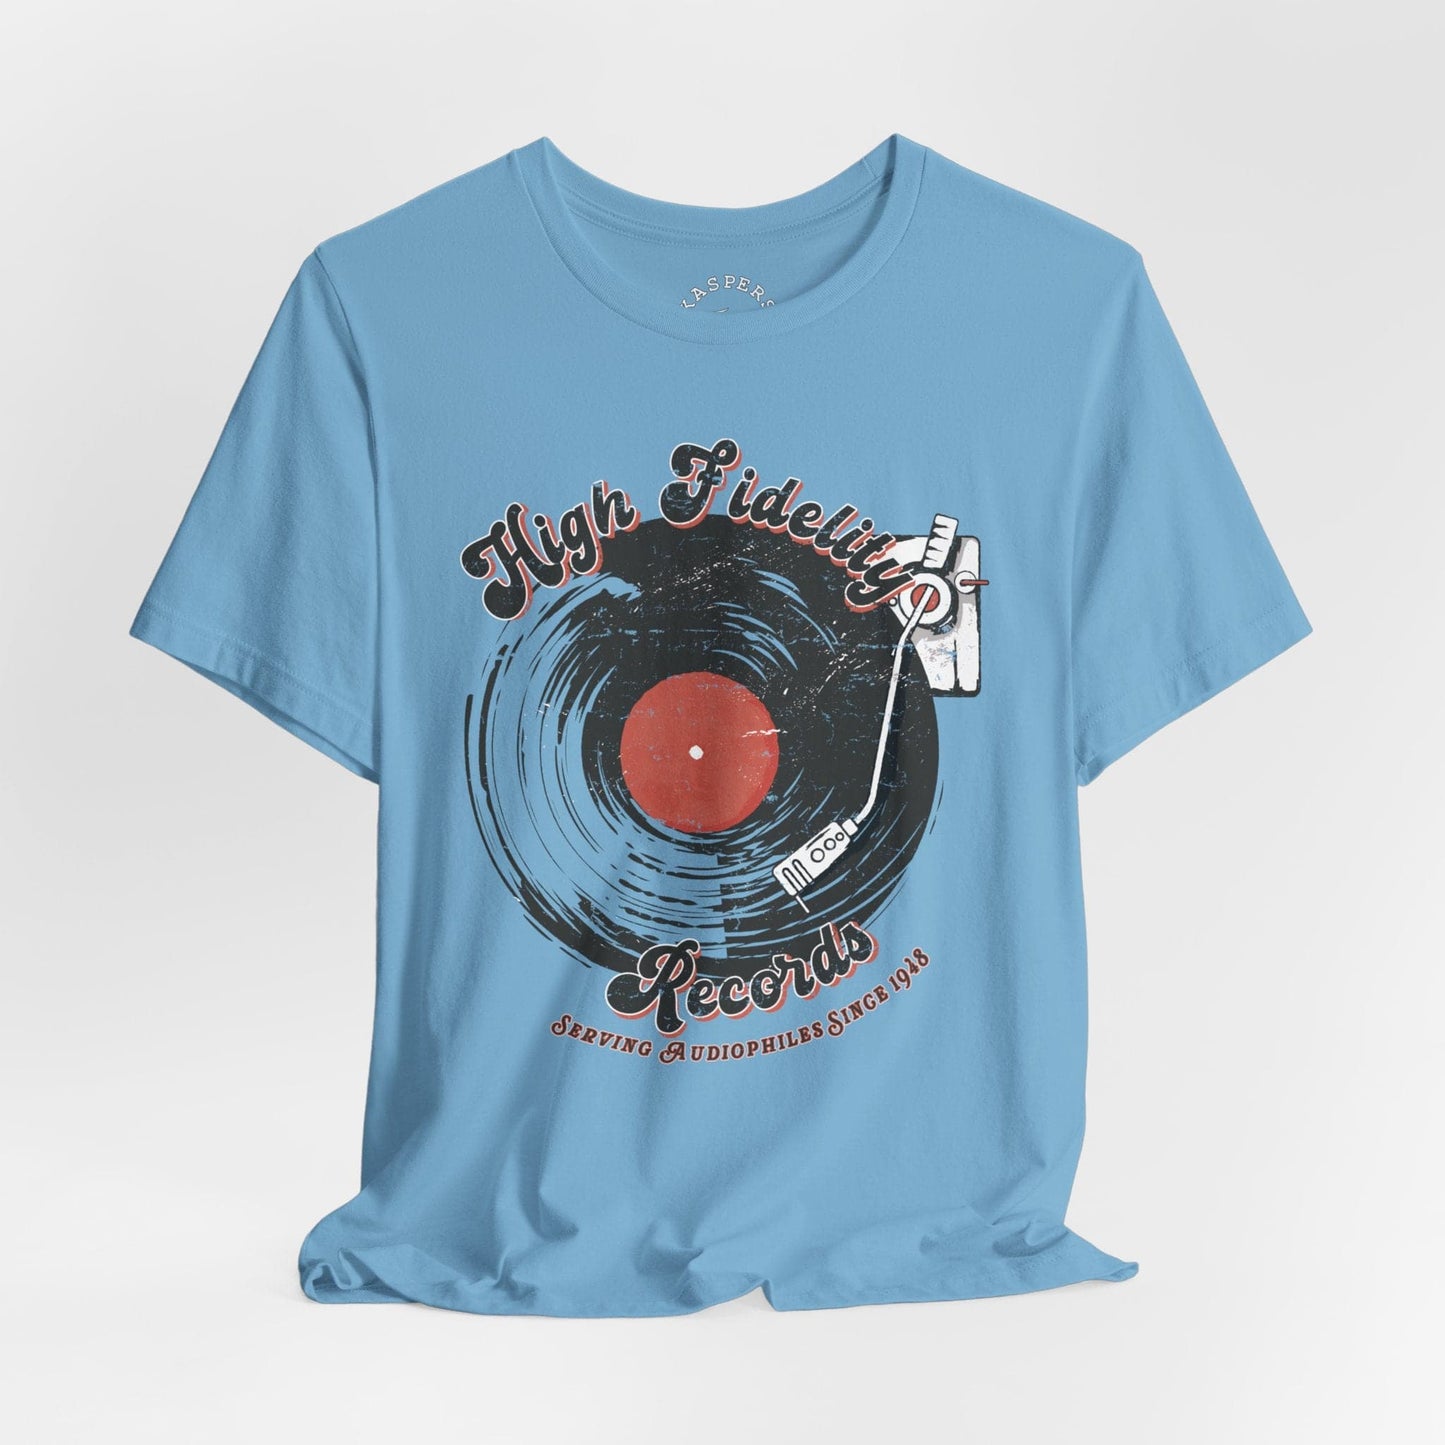 High Fidelity Records T-Shirt